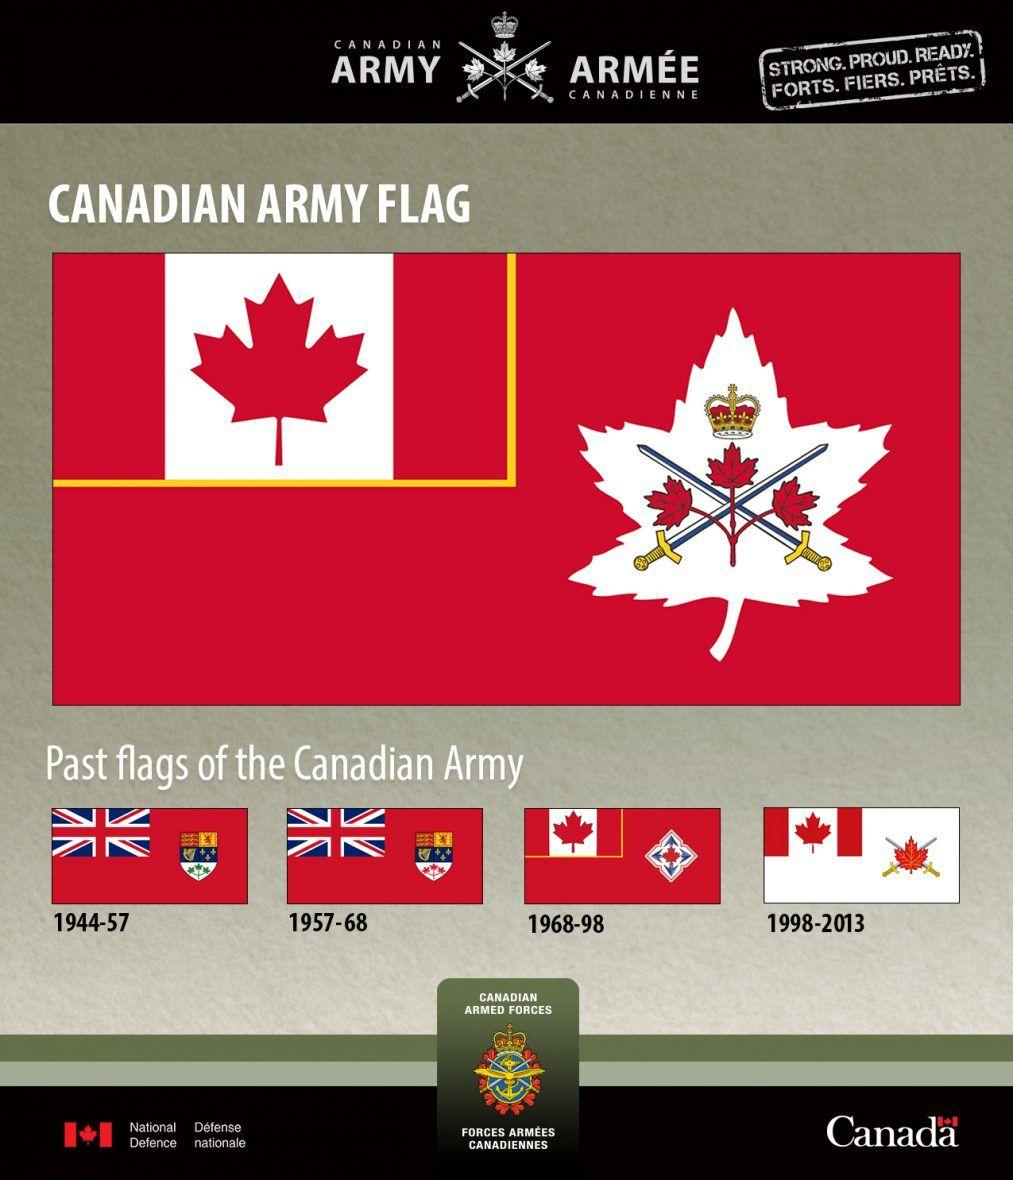 Red Canadian Leaf Logo - New Canadian Army flag unveiled – The Maple Leaf